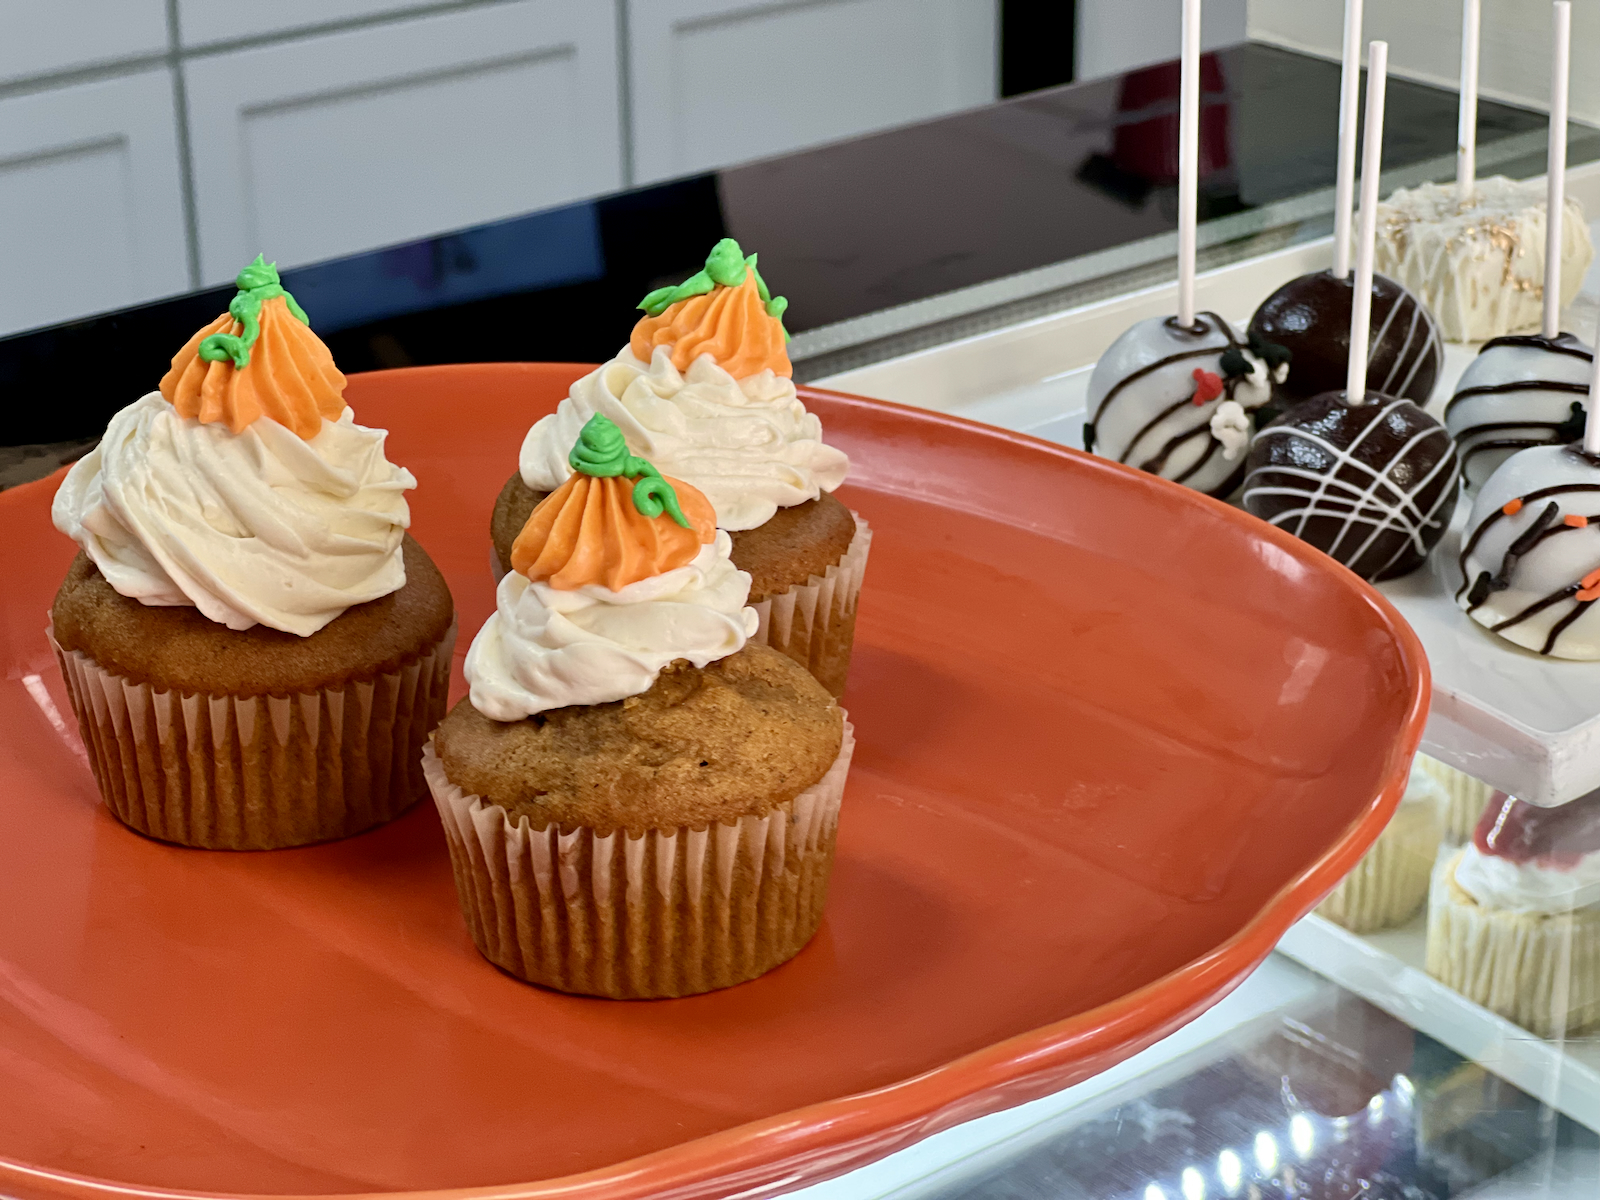 Pumpkin cupcakes and cake pops